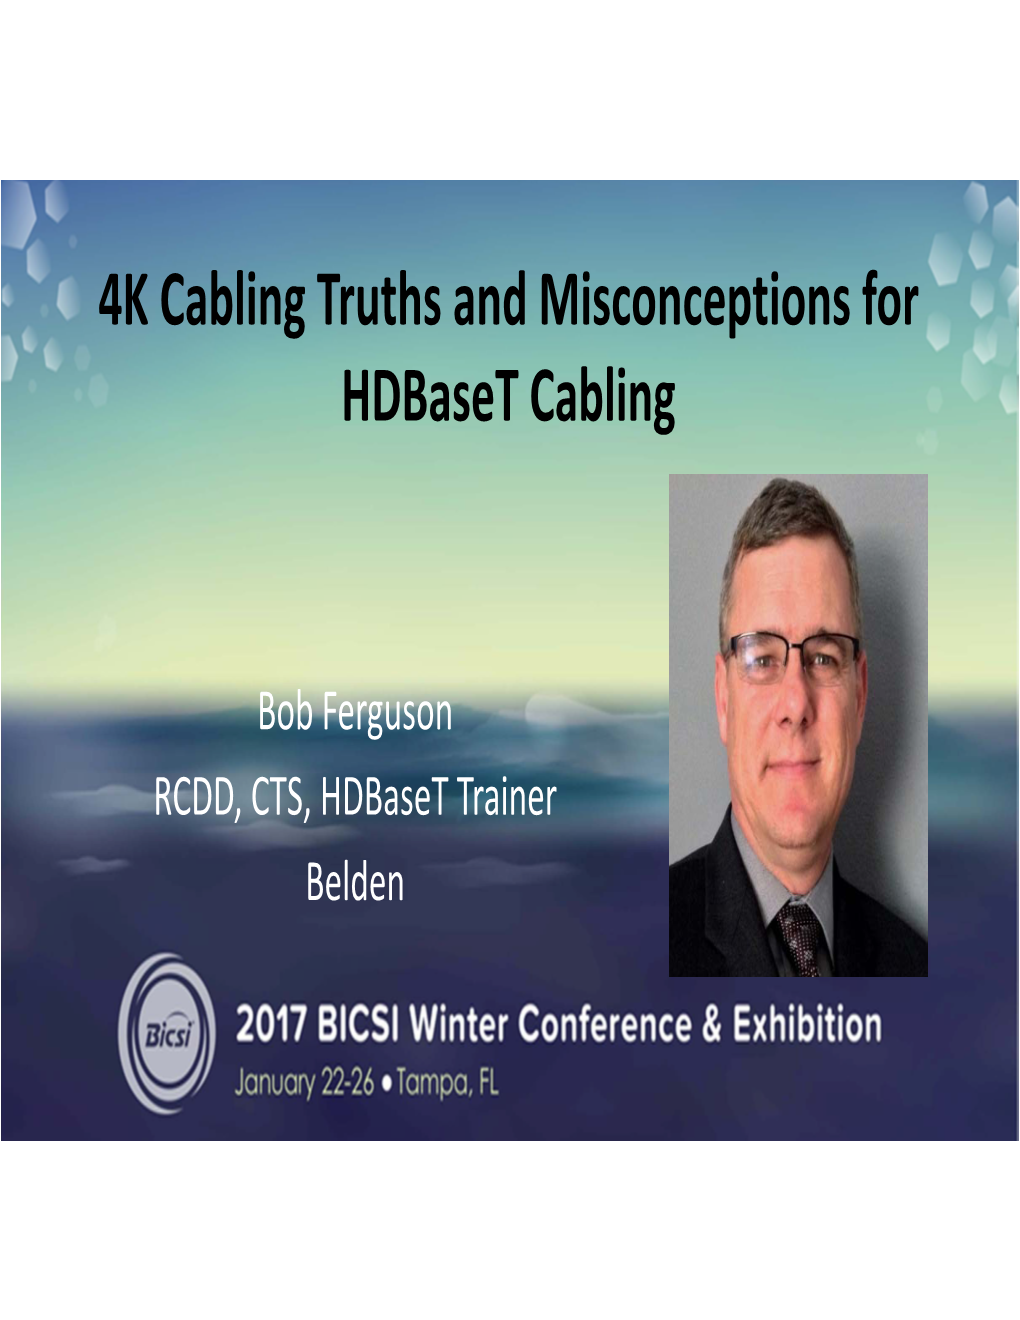 4K Cabling Truths and Misconceptions for Hdbaset Cabling